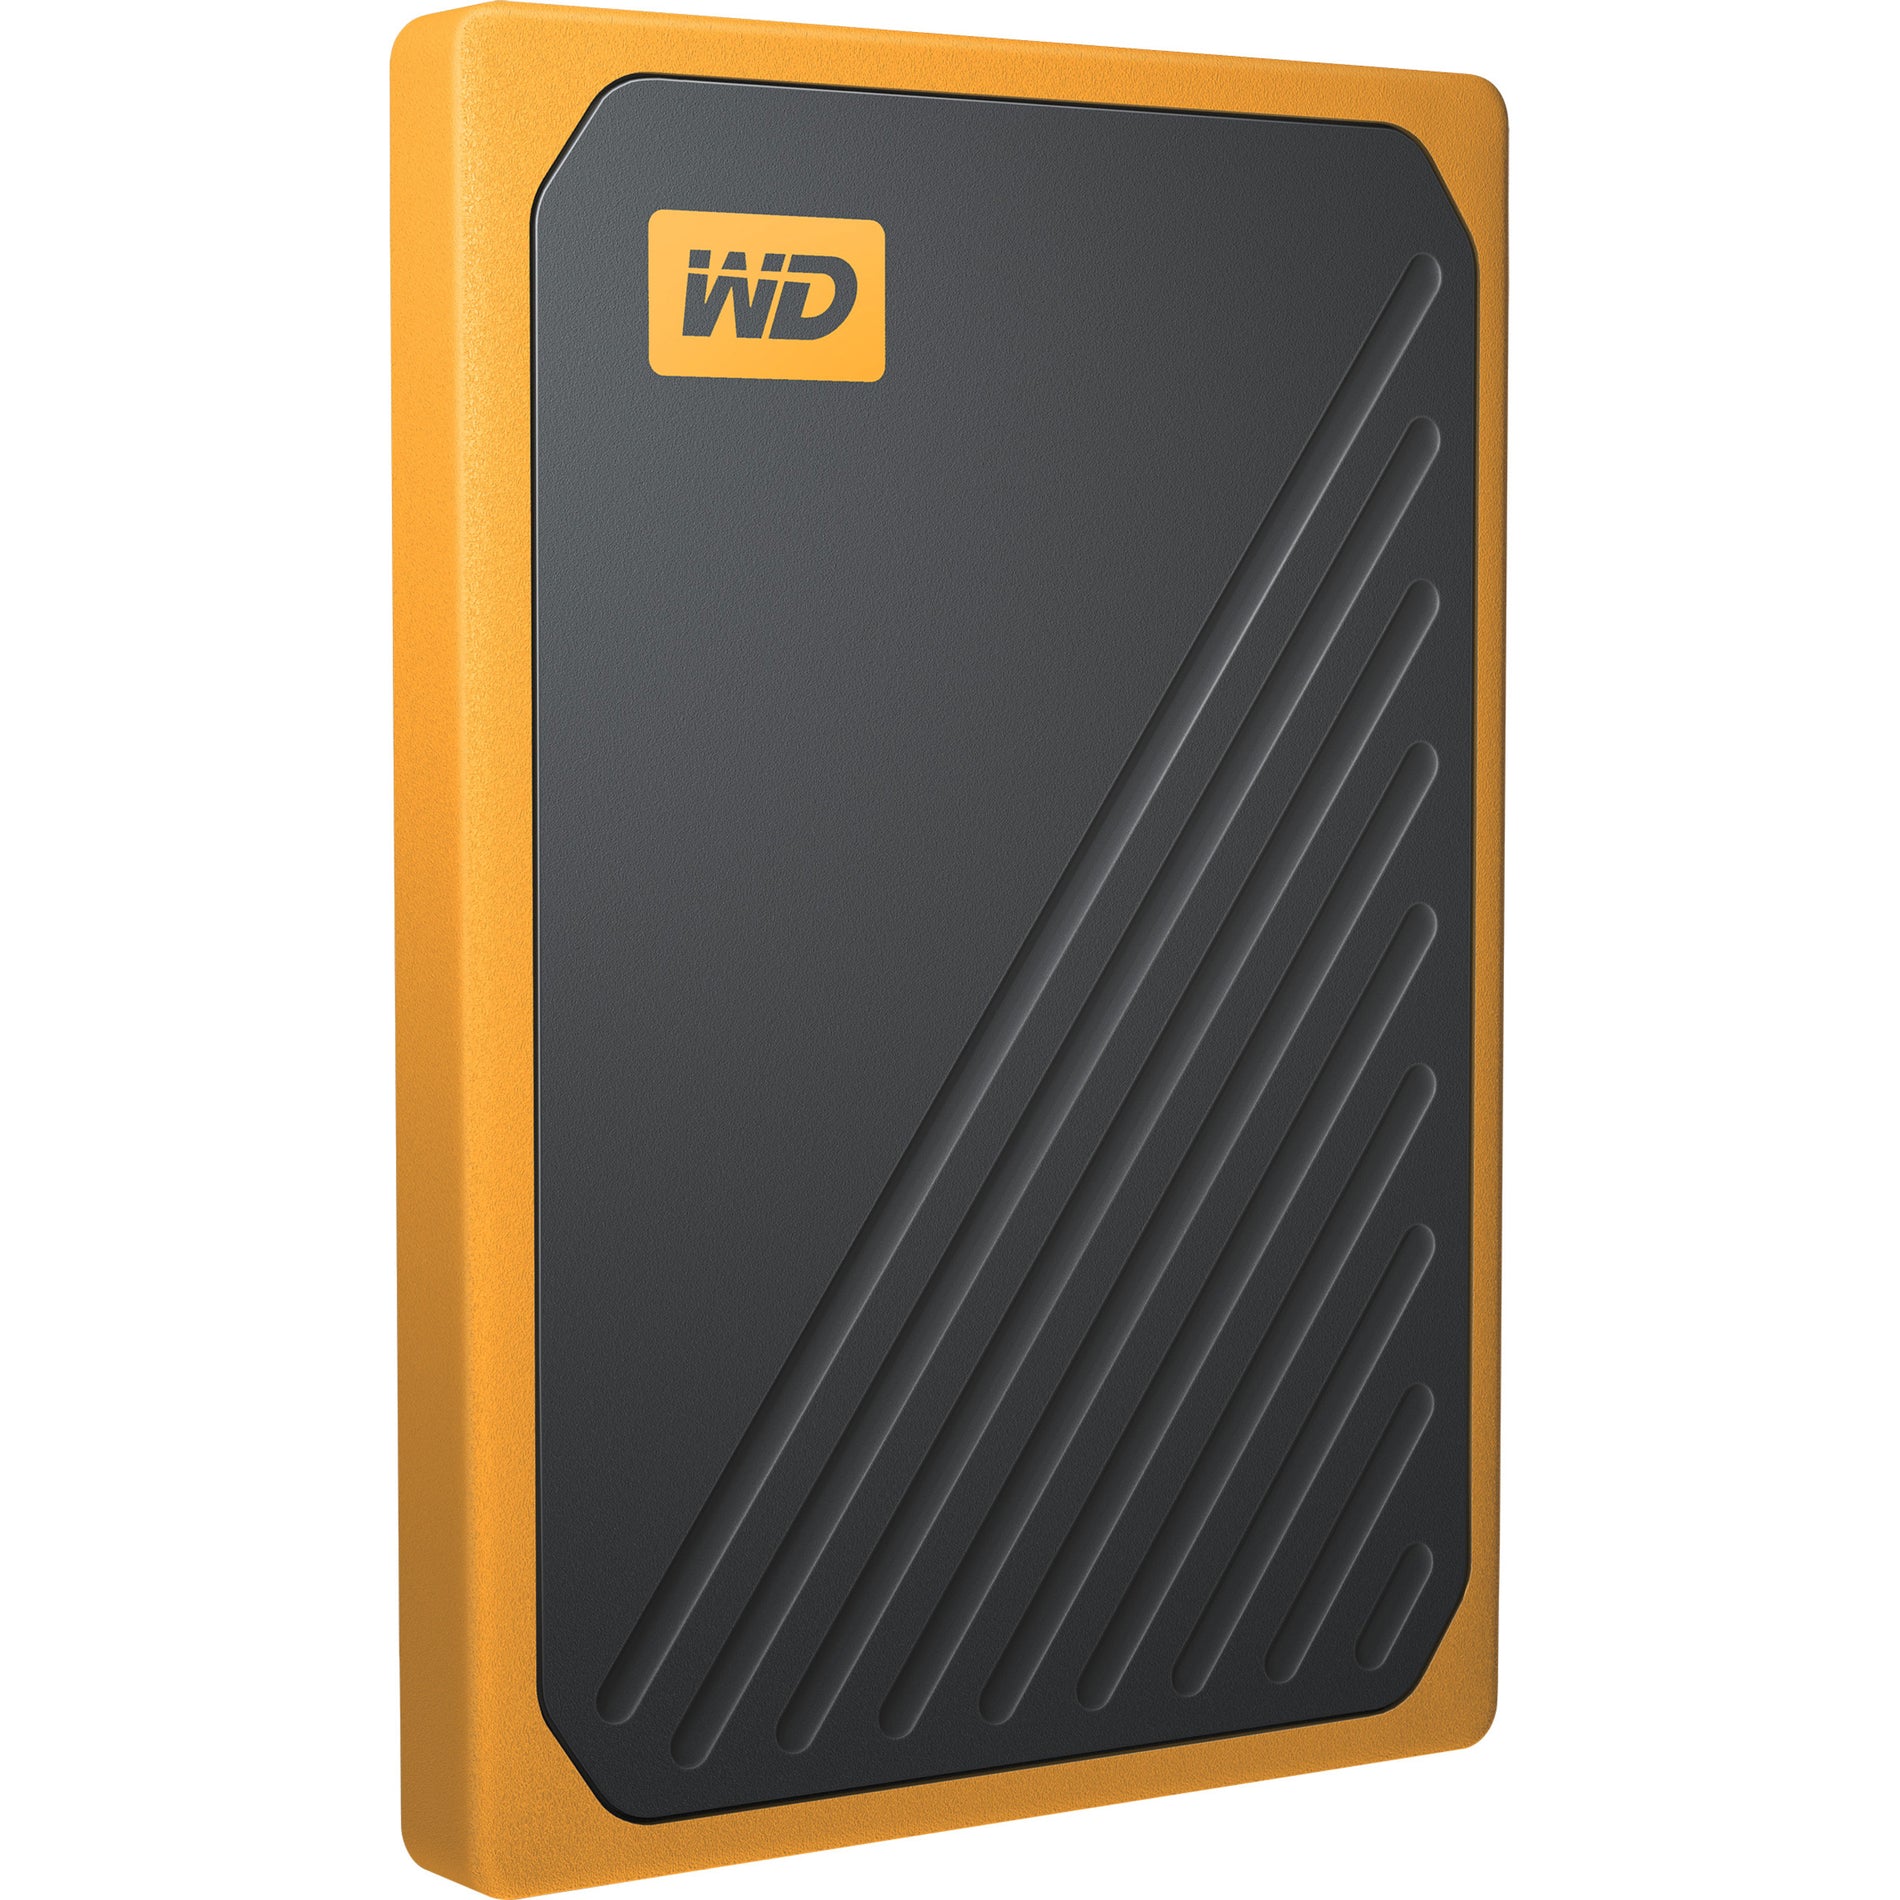 WD WDBMCG5000AYT-WESN My Passport Go Portable SSD with Built-in USB Cable, 500 GB - Black, Amber